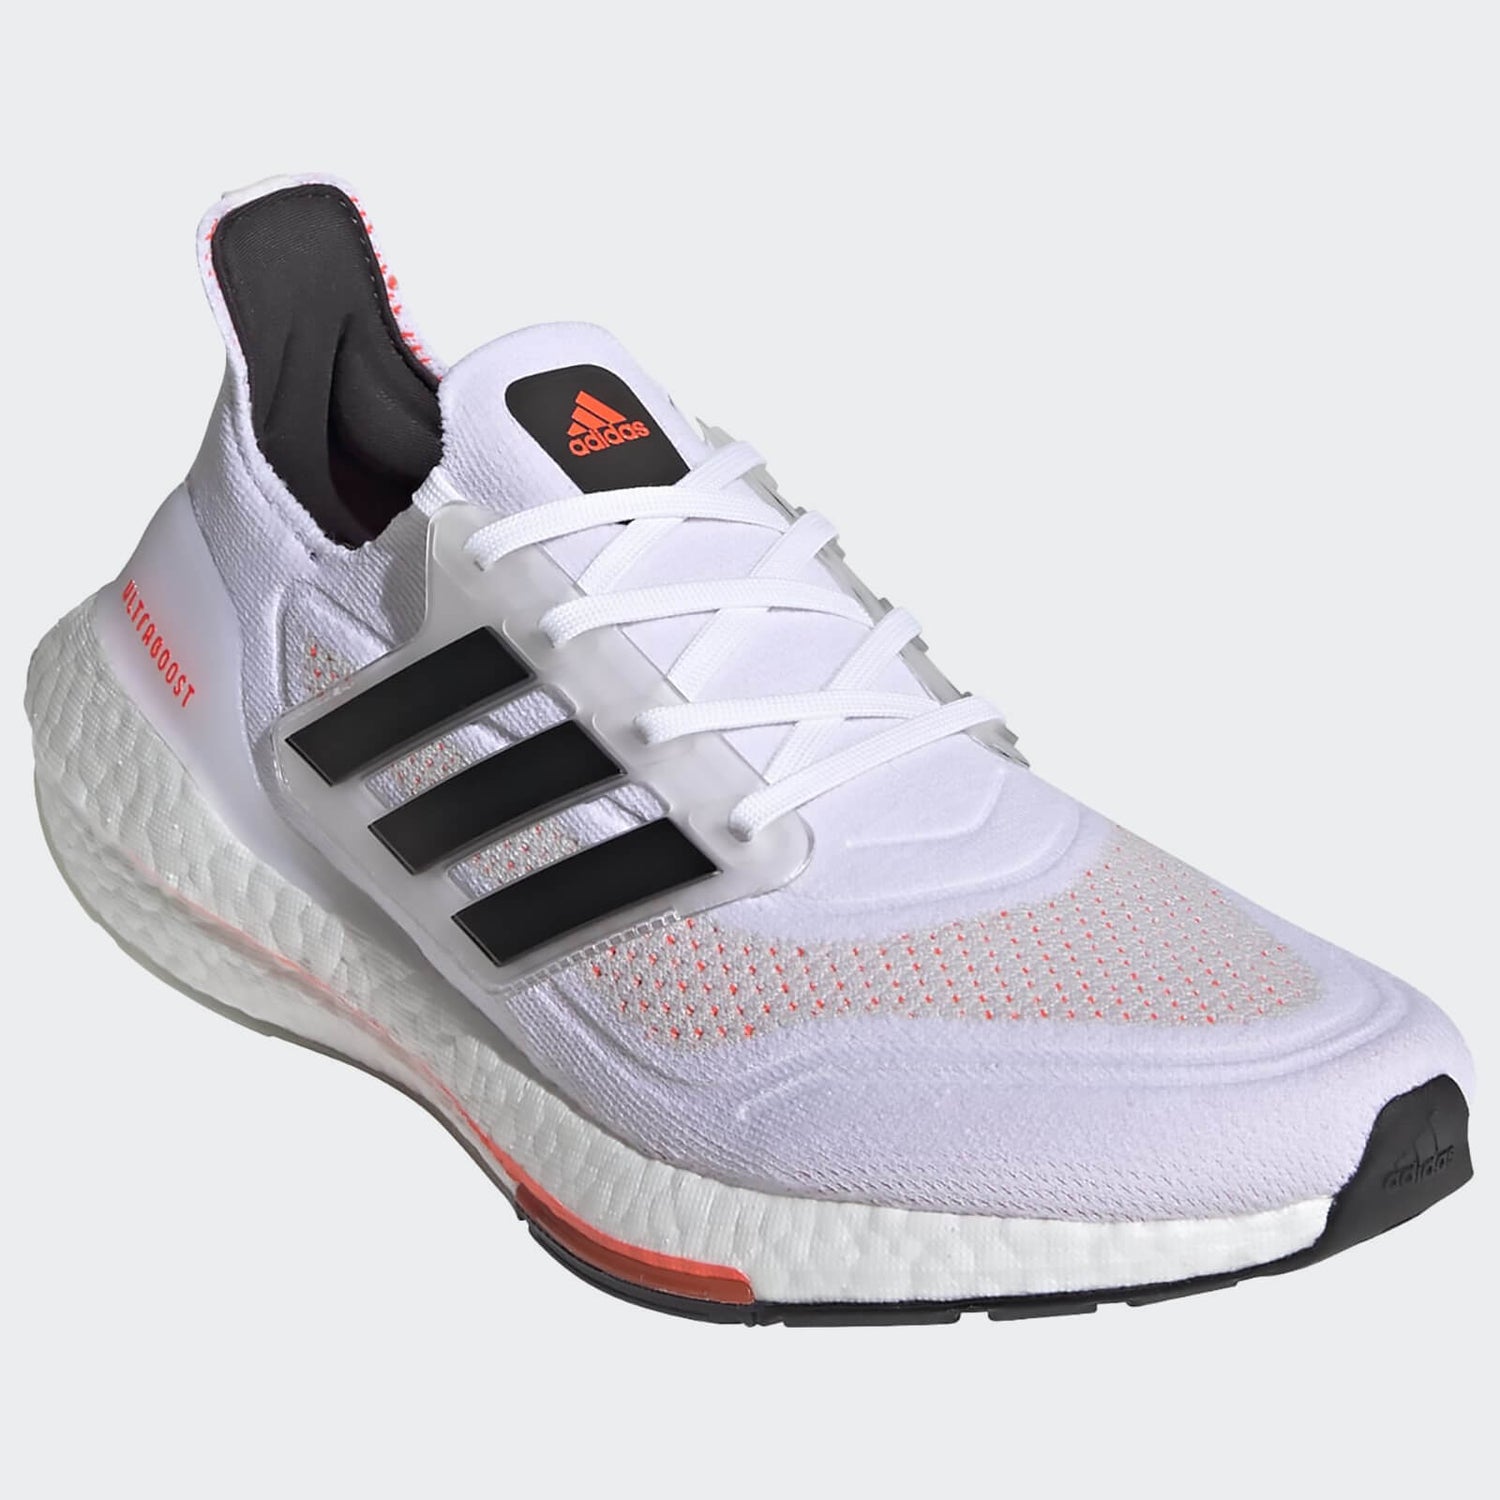 Adidas Ultra Boost 21 Running Shoes Ftwr White Core Black Solar Red Probikekit Uk